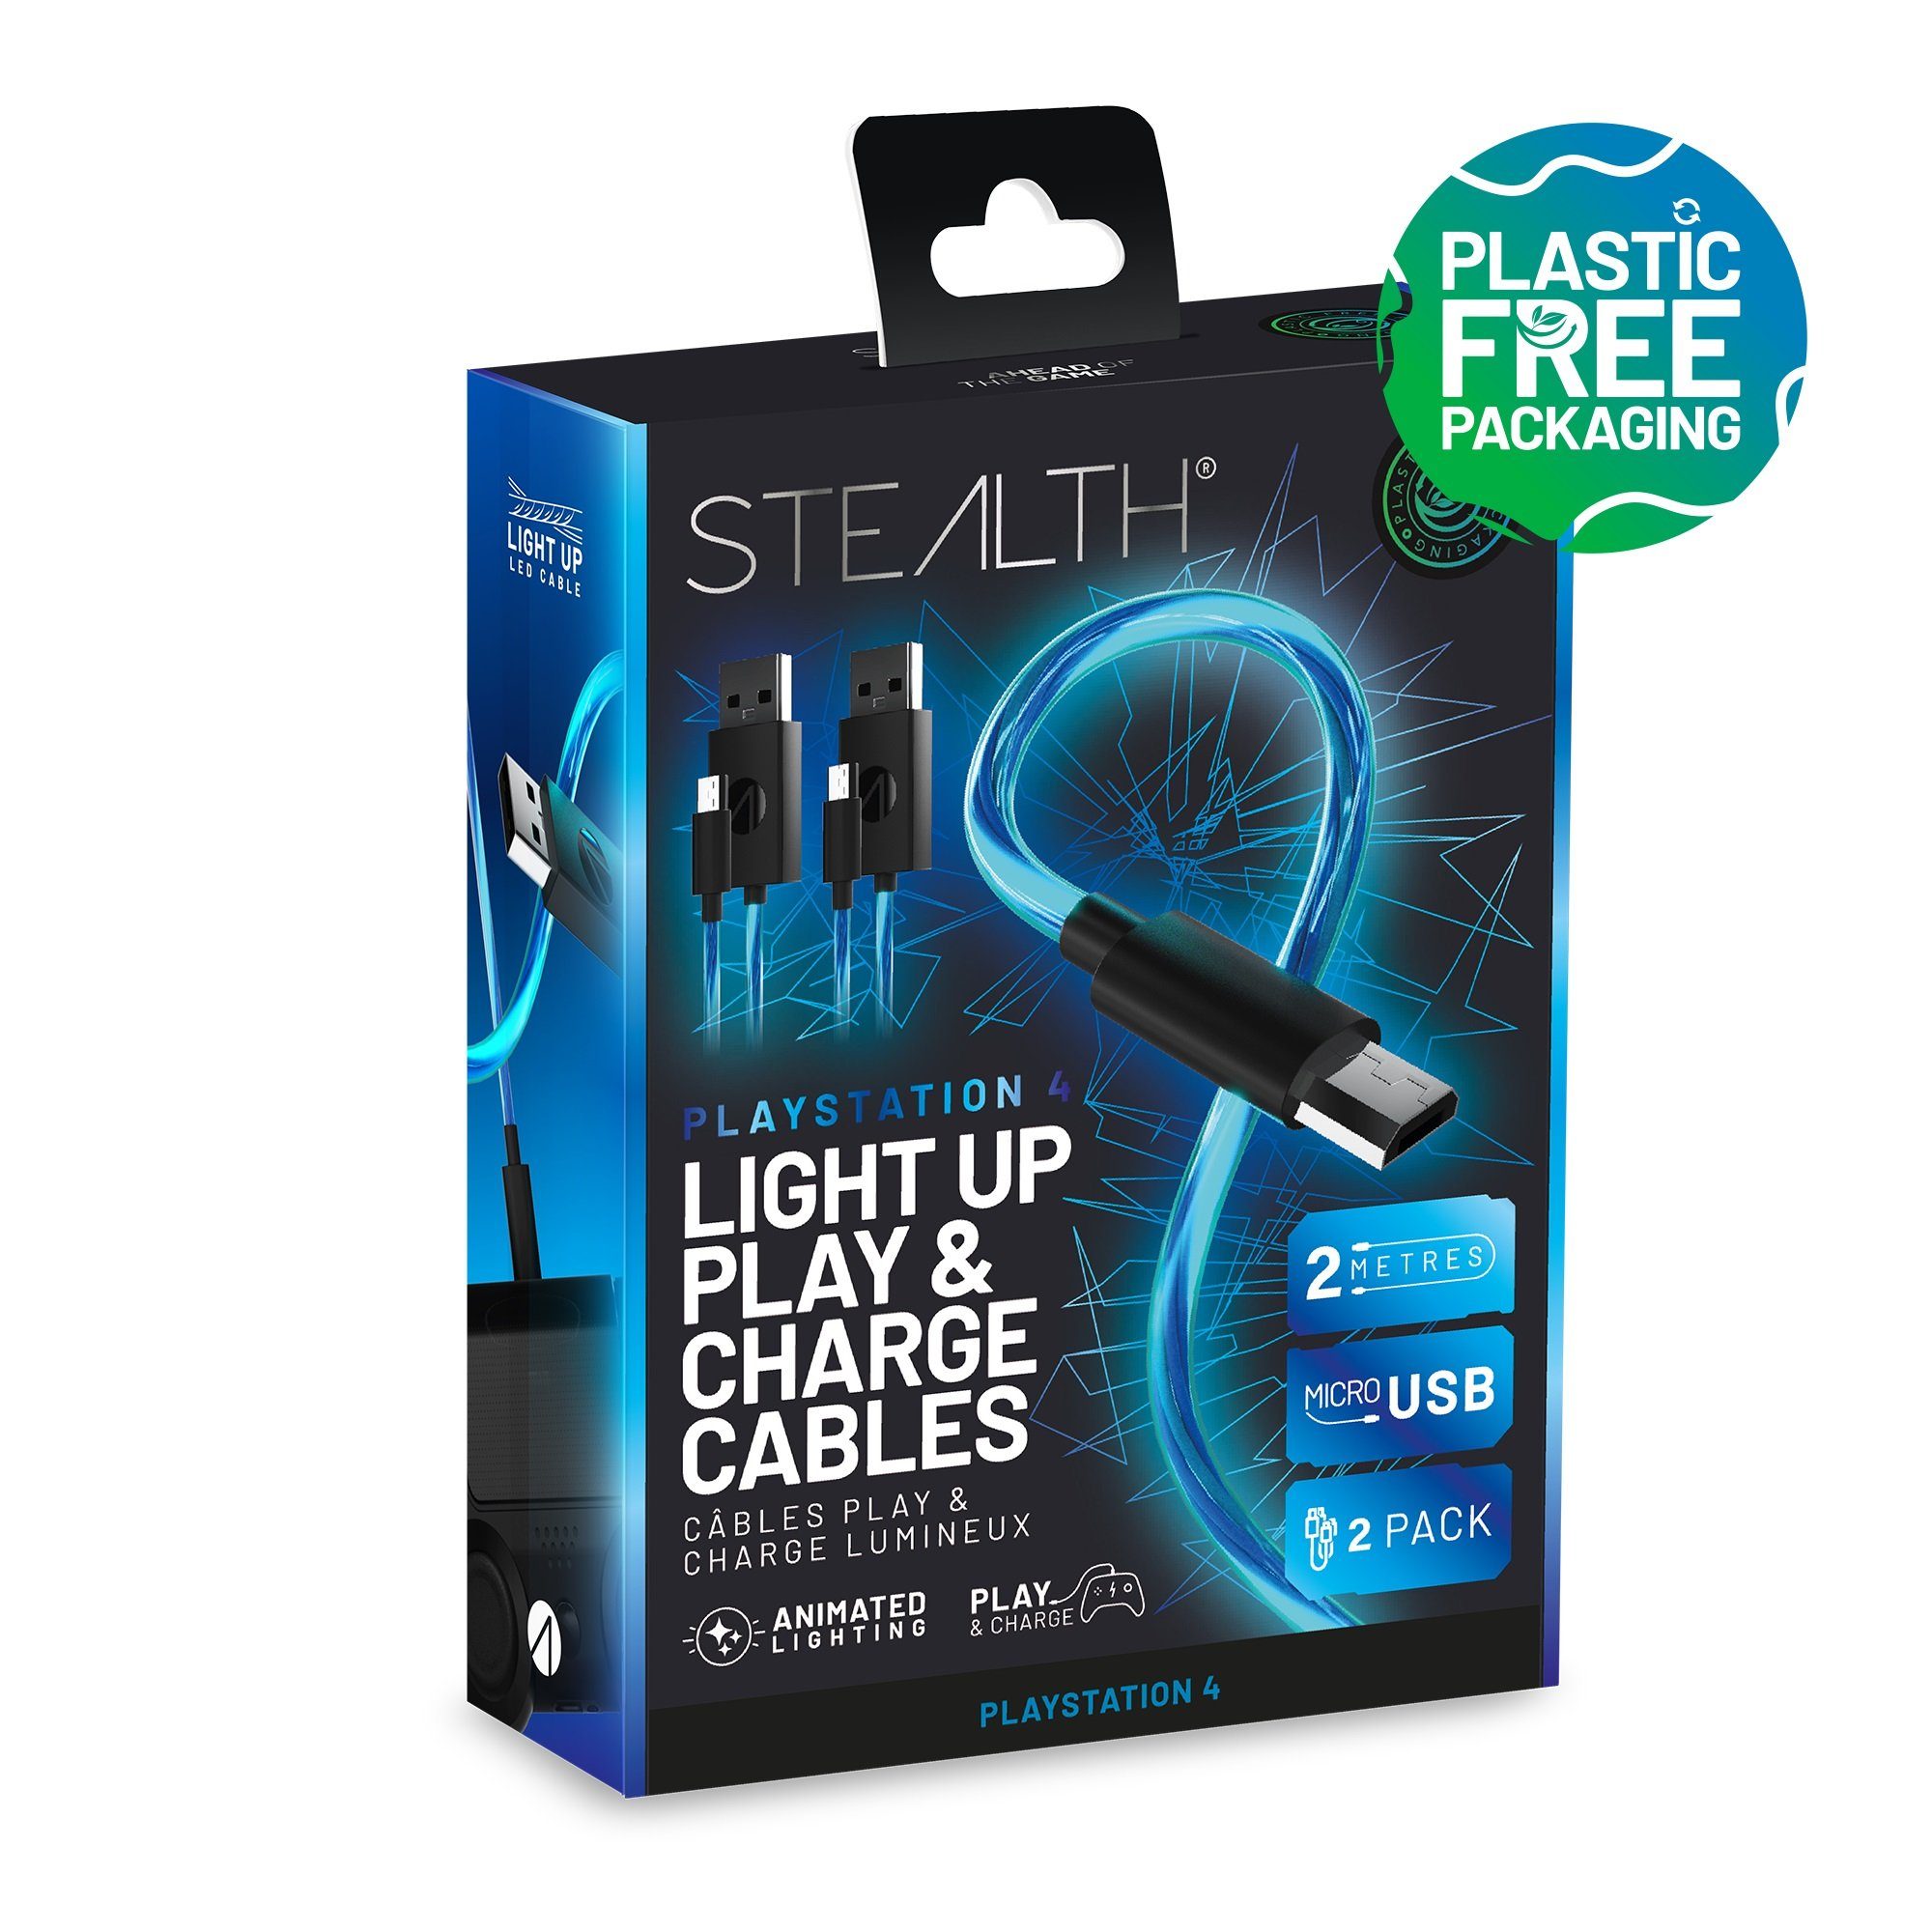 Stealth USB Kabel Doppelpack (2x 2m) Play&Charge mit LED Beleuchtung USB-Kabel, Micro-USB, (200 cm), Beleuchtung